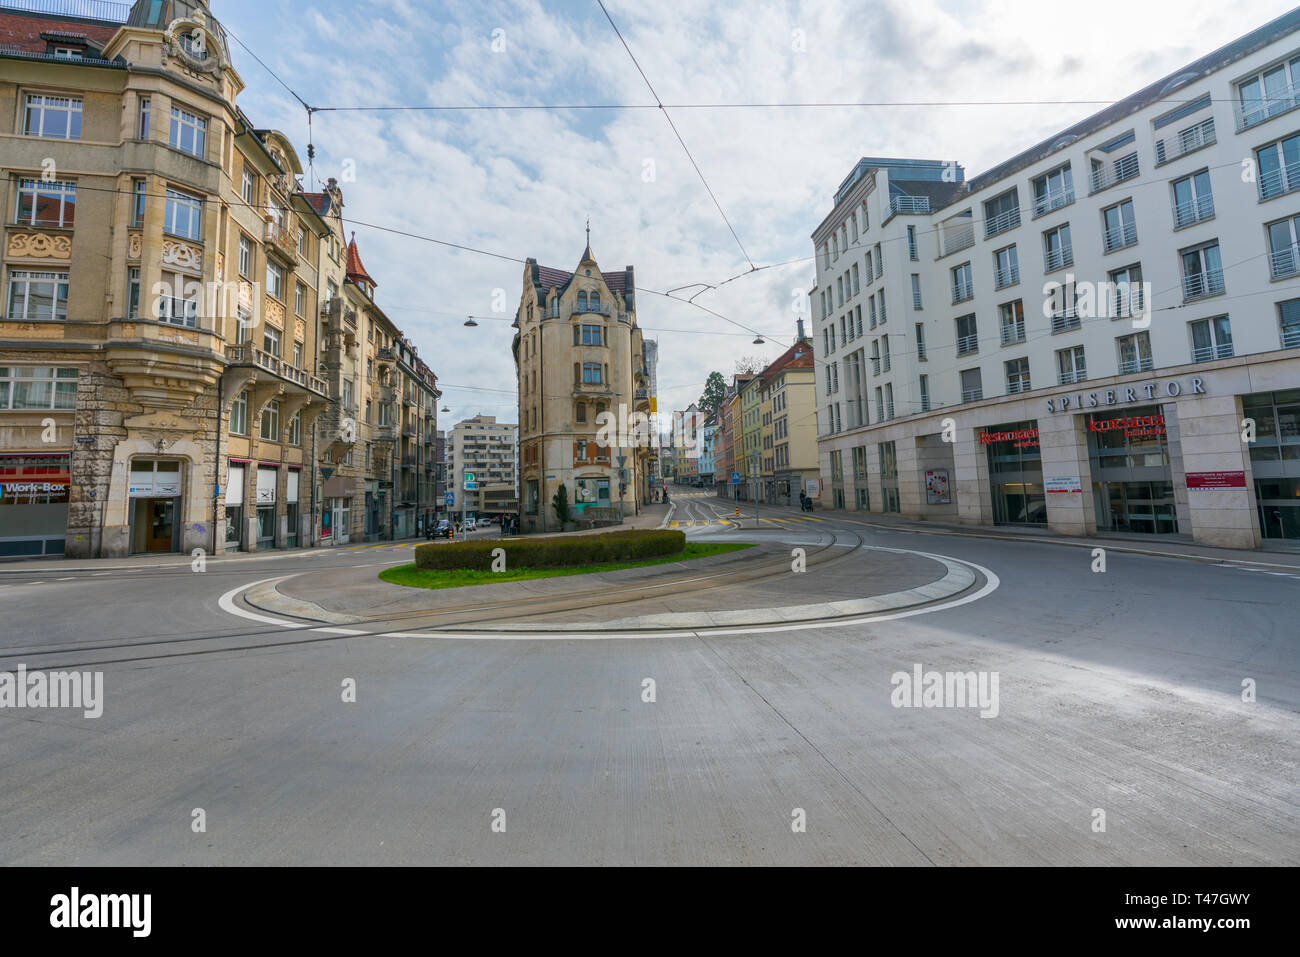 St. Gallen, SG / Switzerland - April 8, 2019: view of the historic old town in the Swiss city of Sankt Gallen Stock Photo